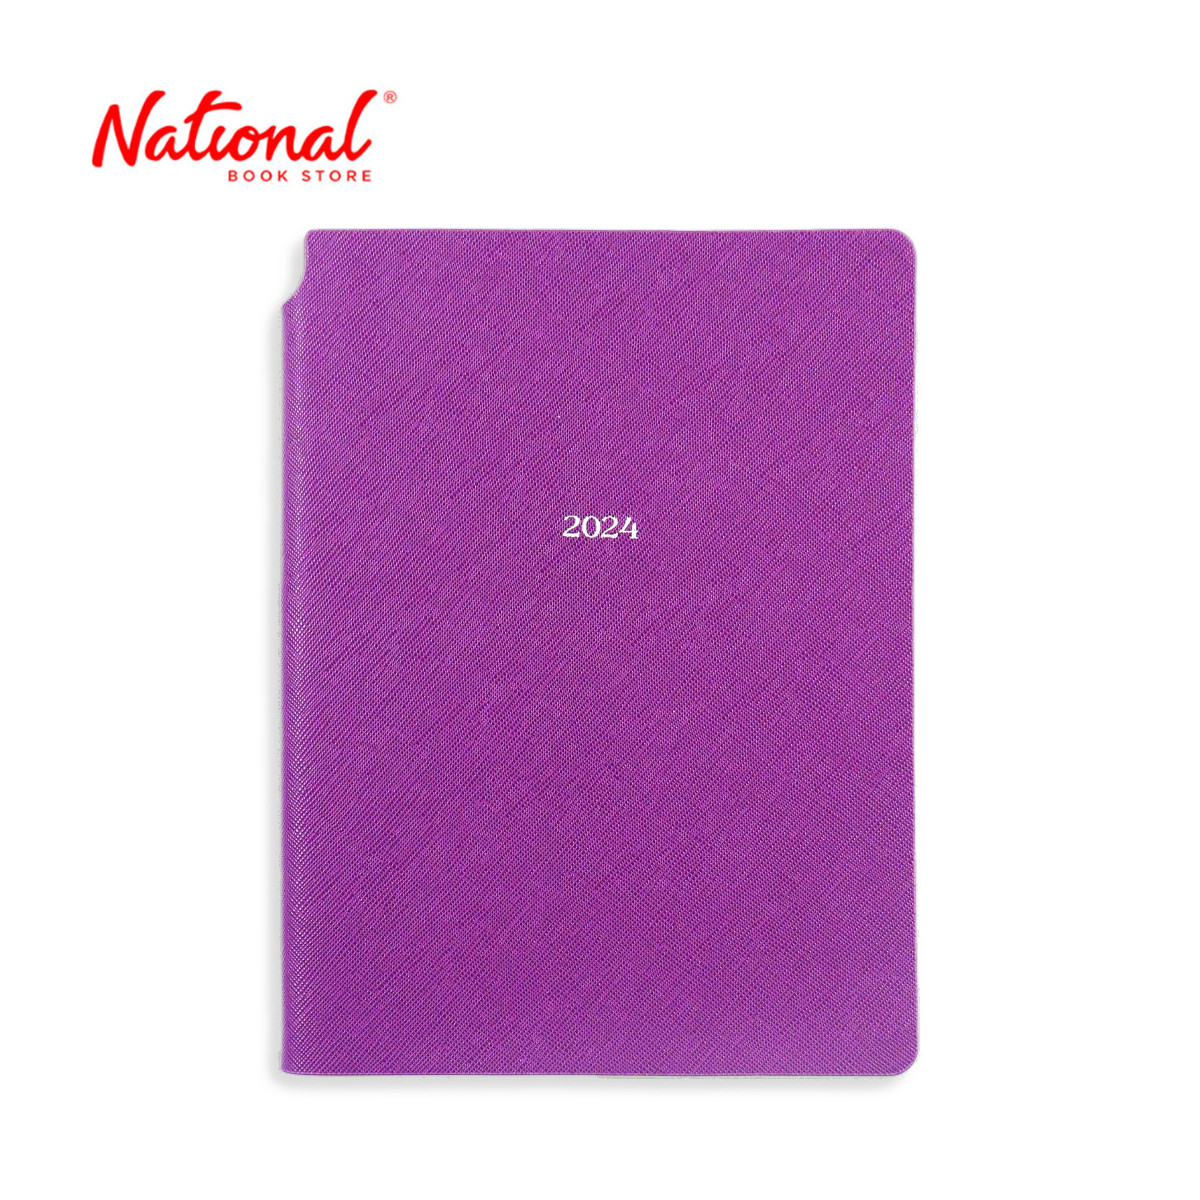 Victoria 2024 Weekly Planner 14x20.5cm 80 Sheets Purple Soft Cover - Calendars & Planners